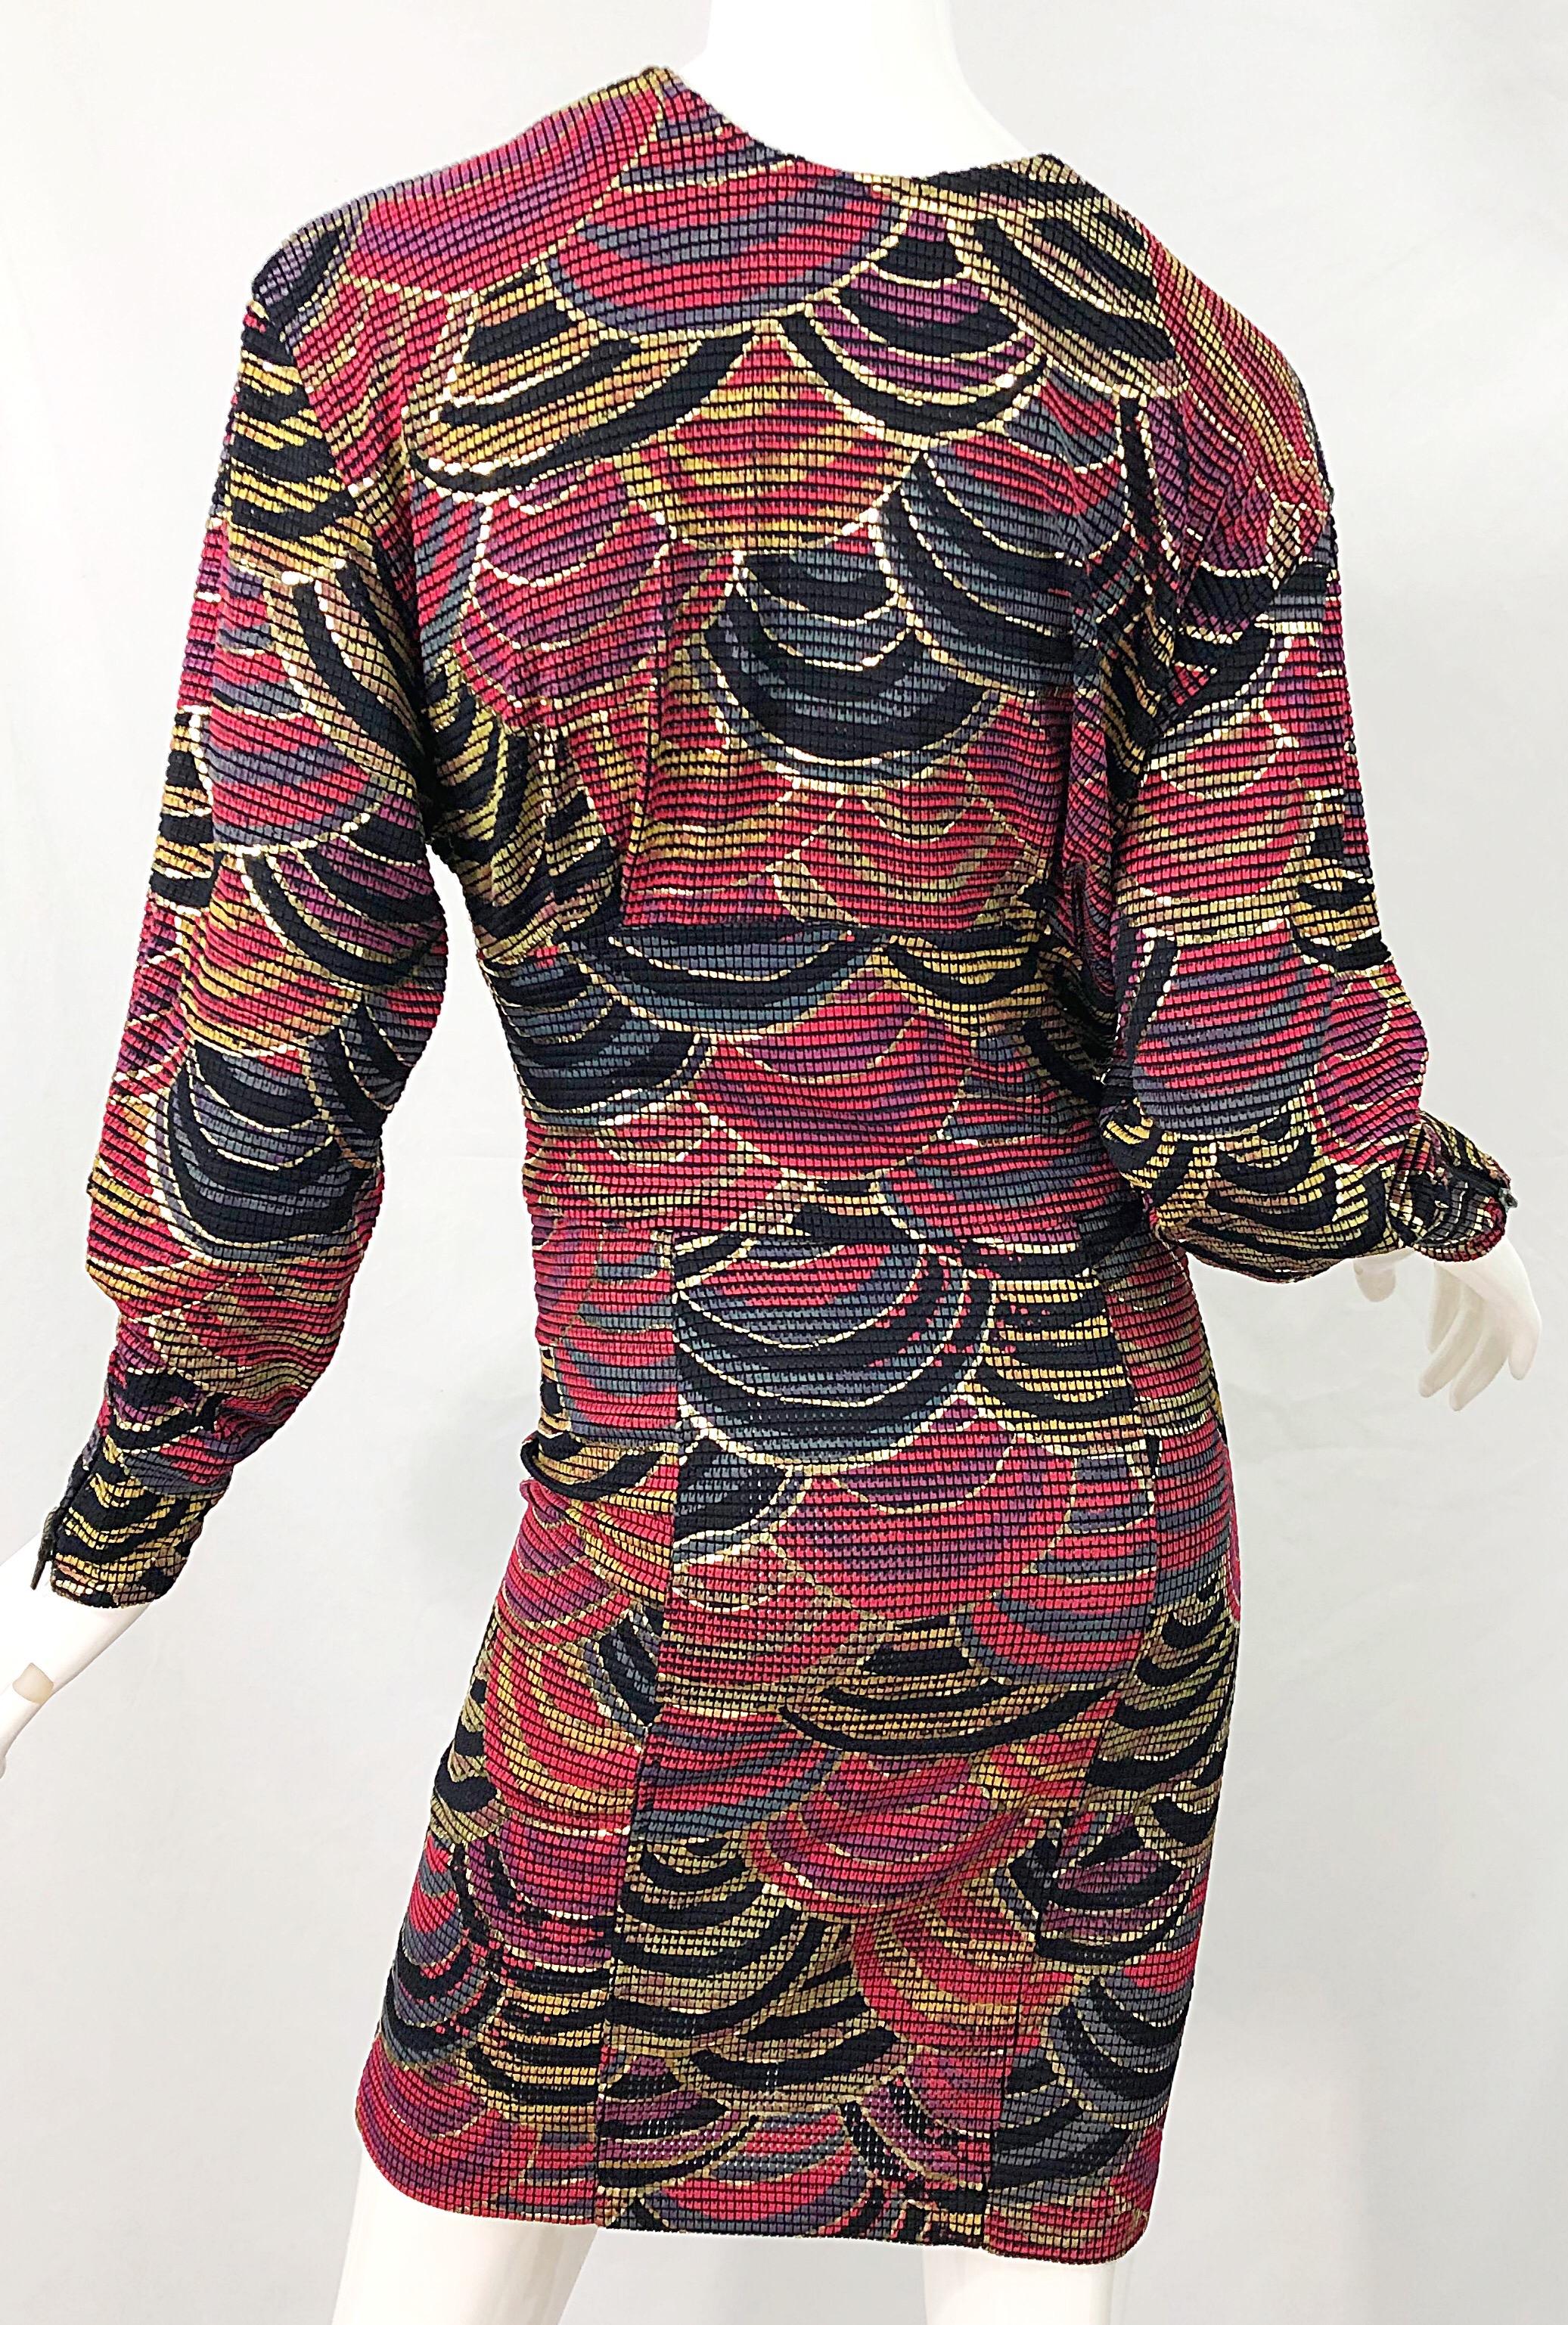 1980s Hand Painted Reversible Red + Gold + Green Vintage 80s Avant Garde Dress For Sale 14